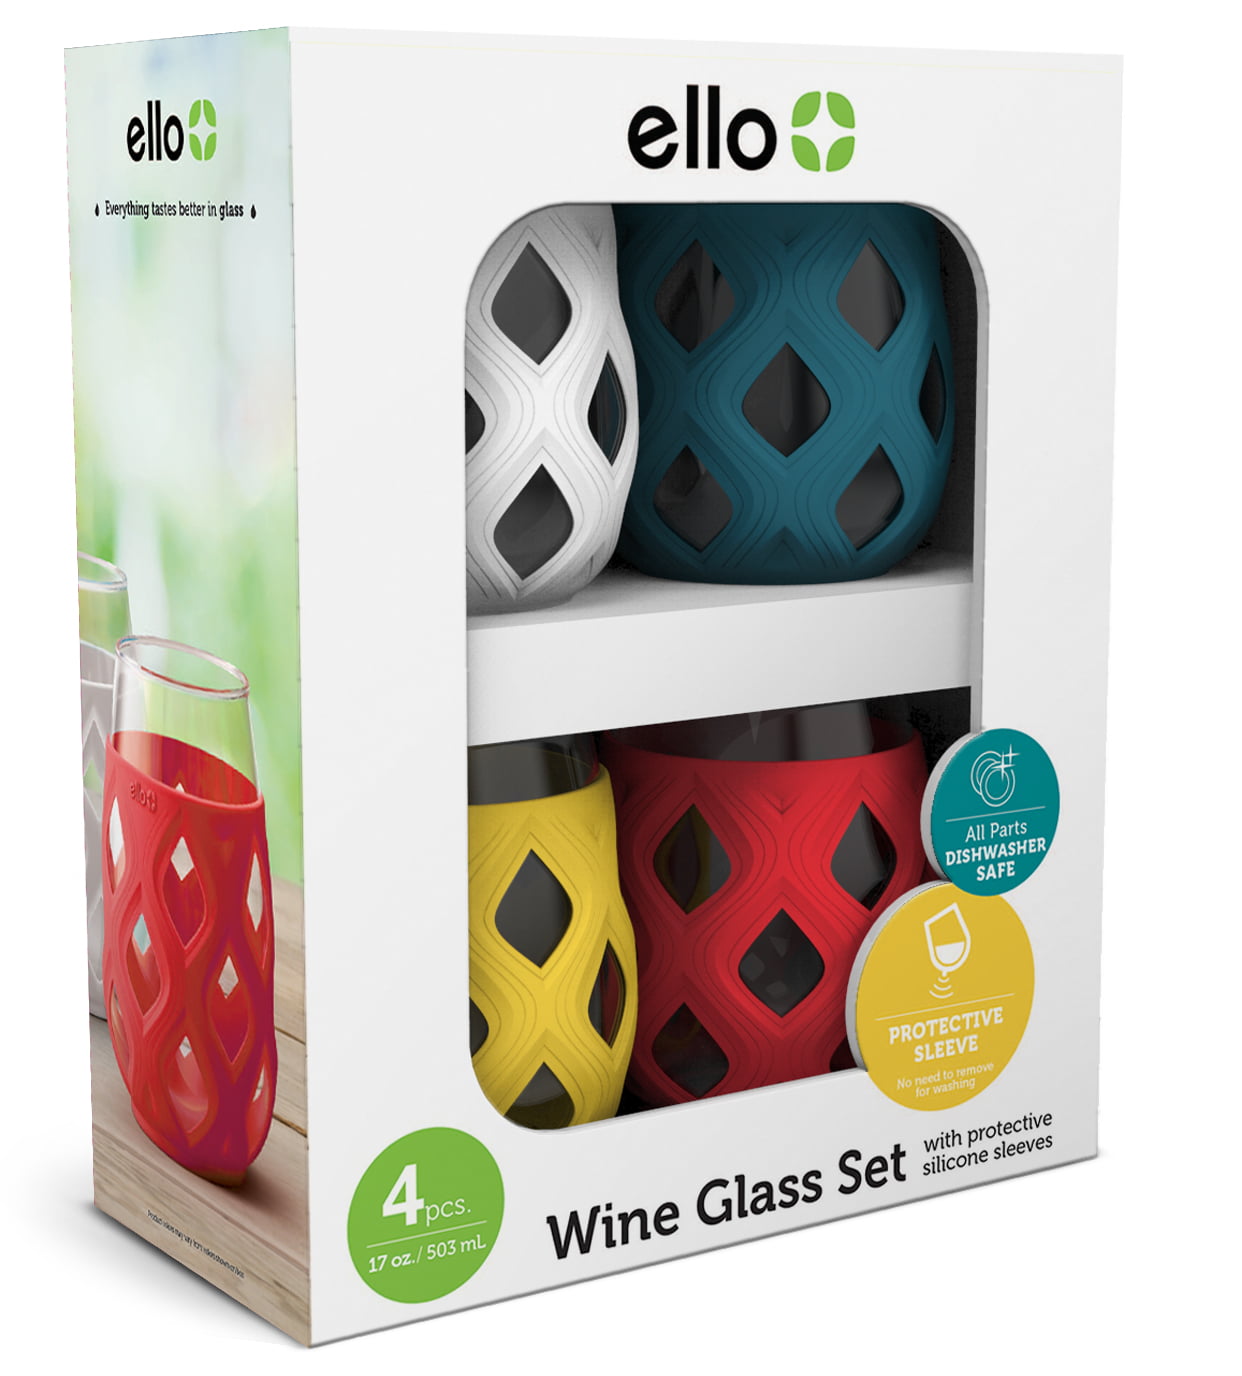 2 Ello Tallboy 16oz Tumbler Glasses & 4 Ello Cru Stemless Wine Glasses All  with Rubber Sleeves Alcohol Collectible Drink Summer Wine Vintage